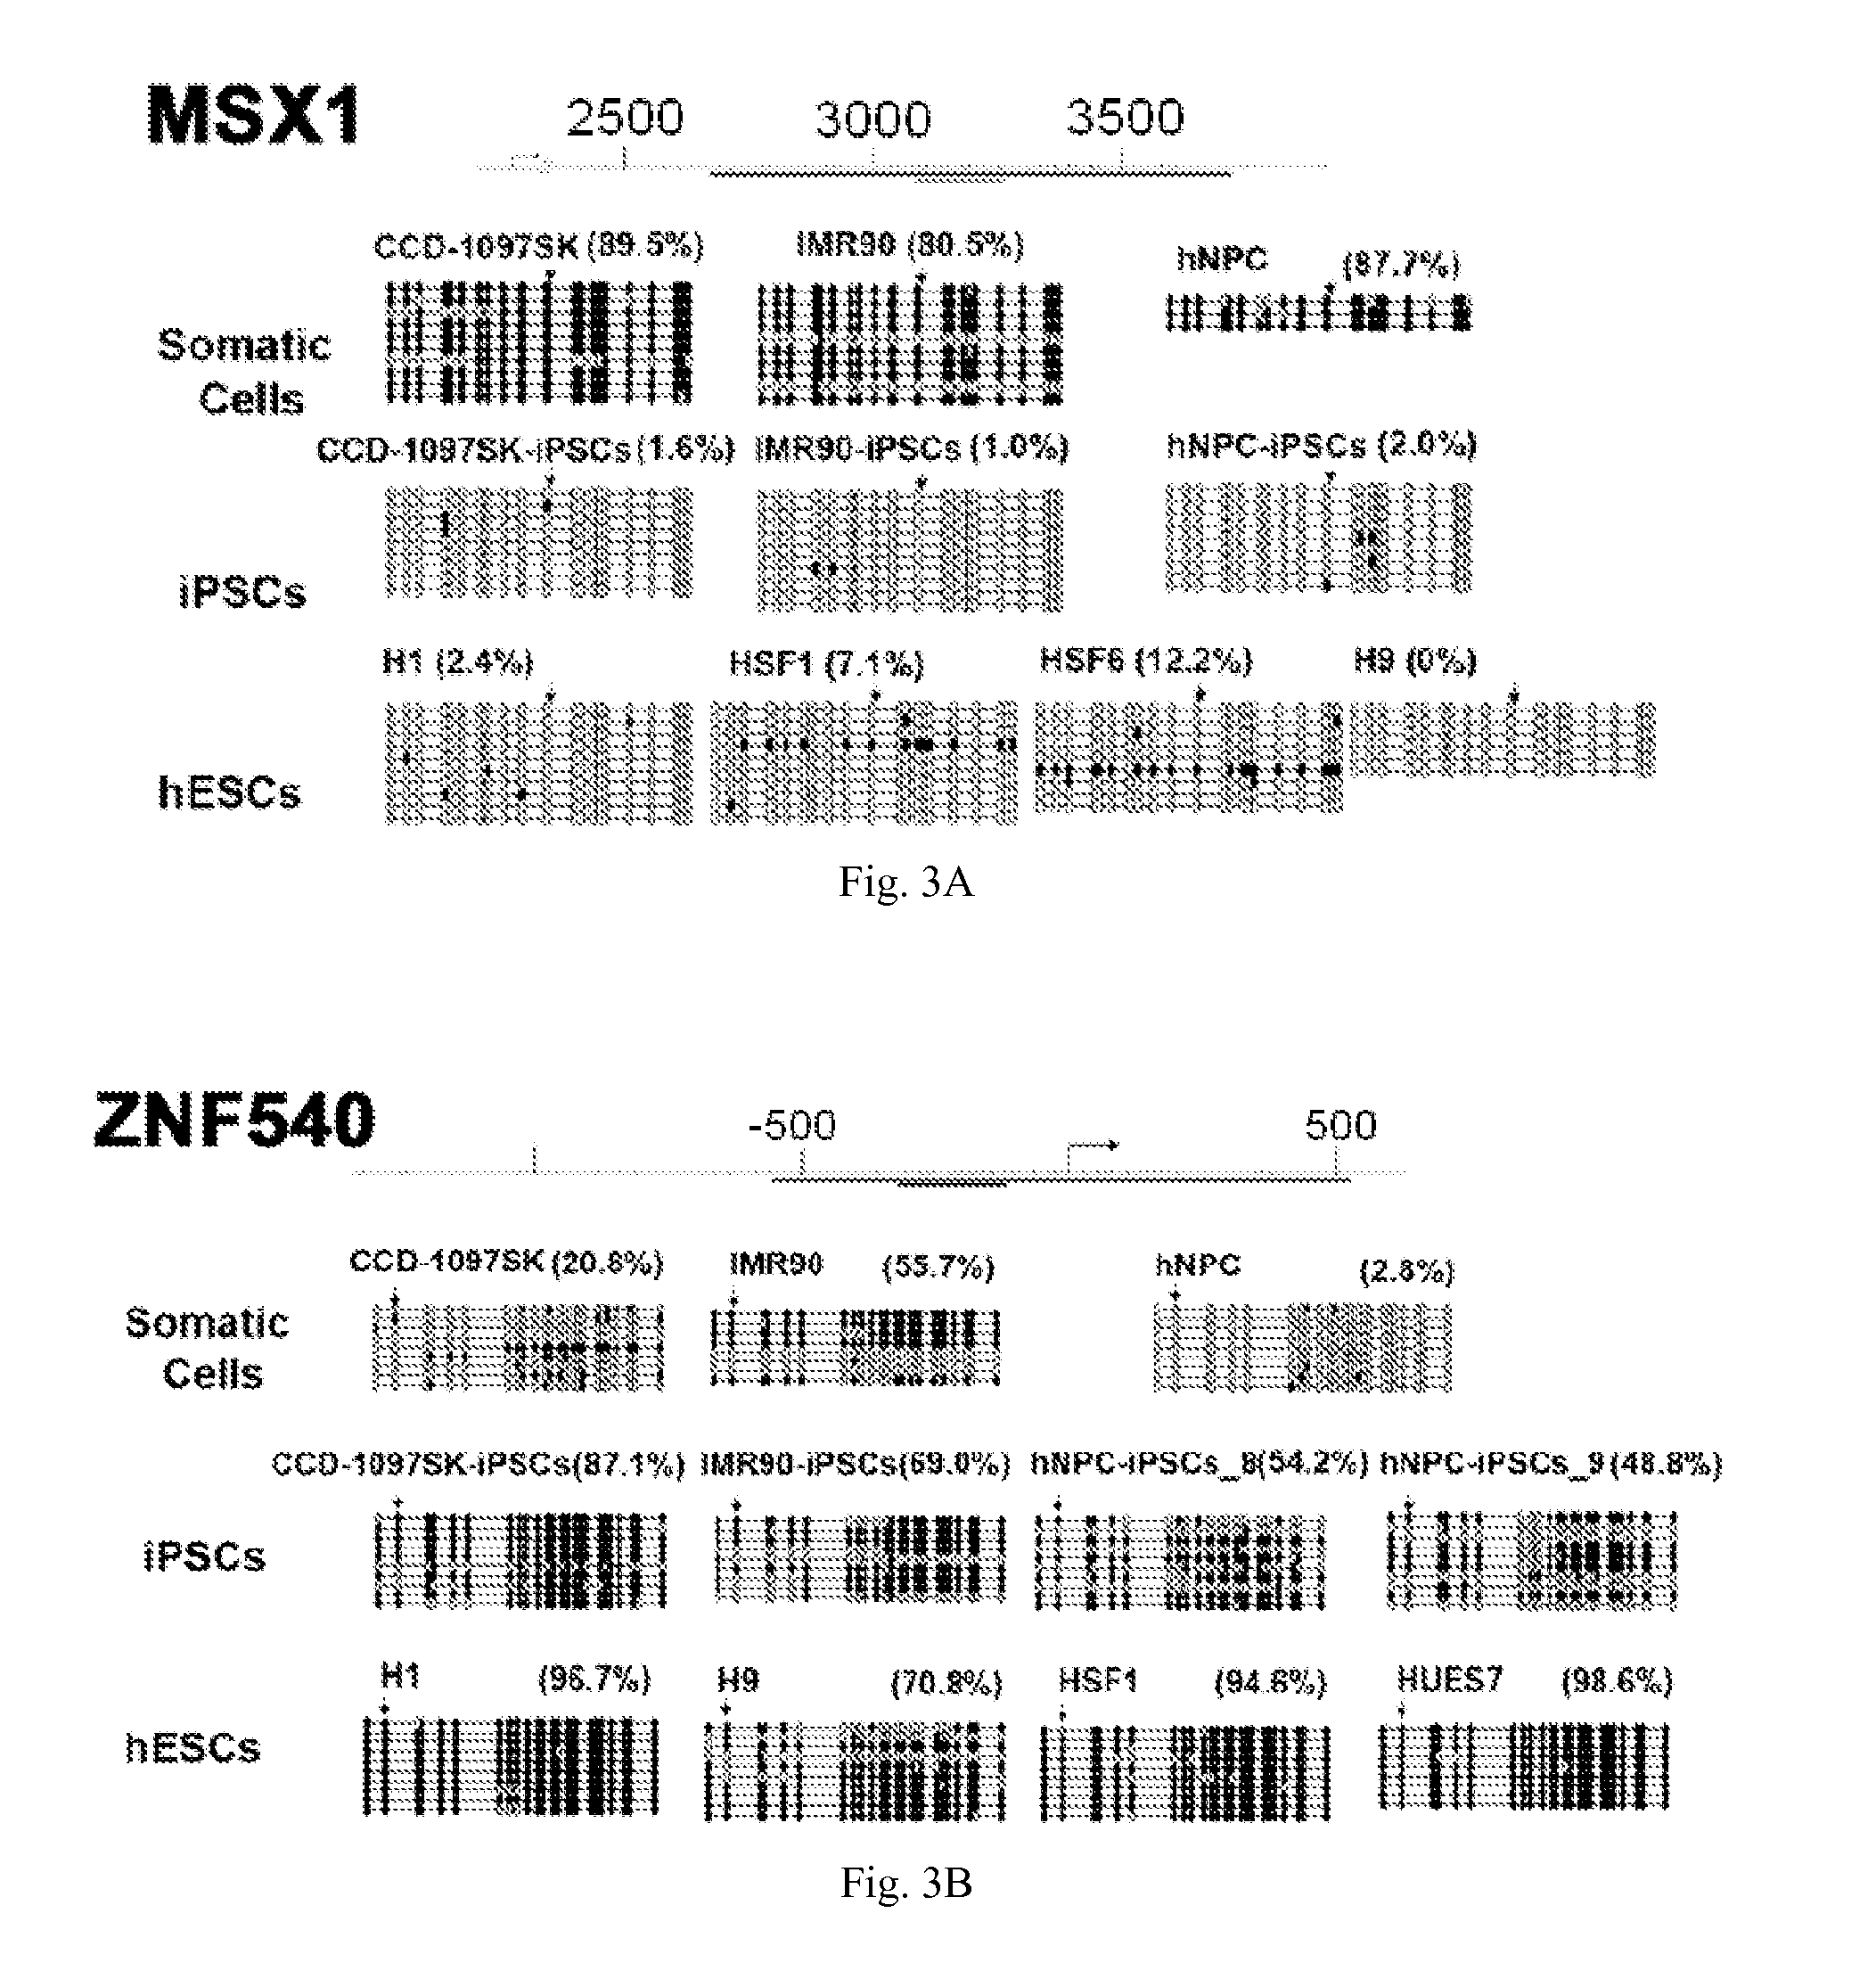 Molecular Markers and Assay Methods for Characterizing Cells